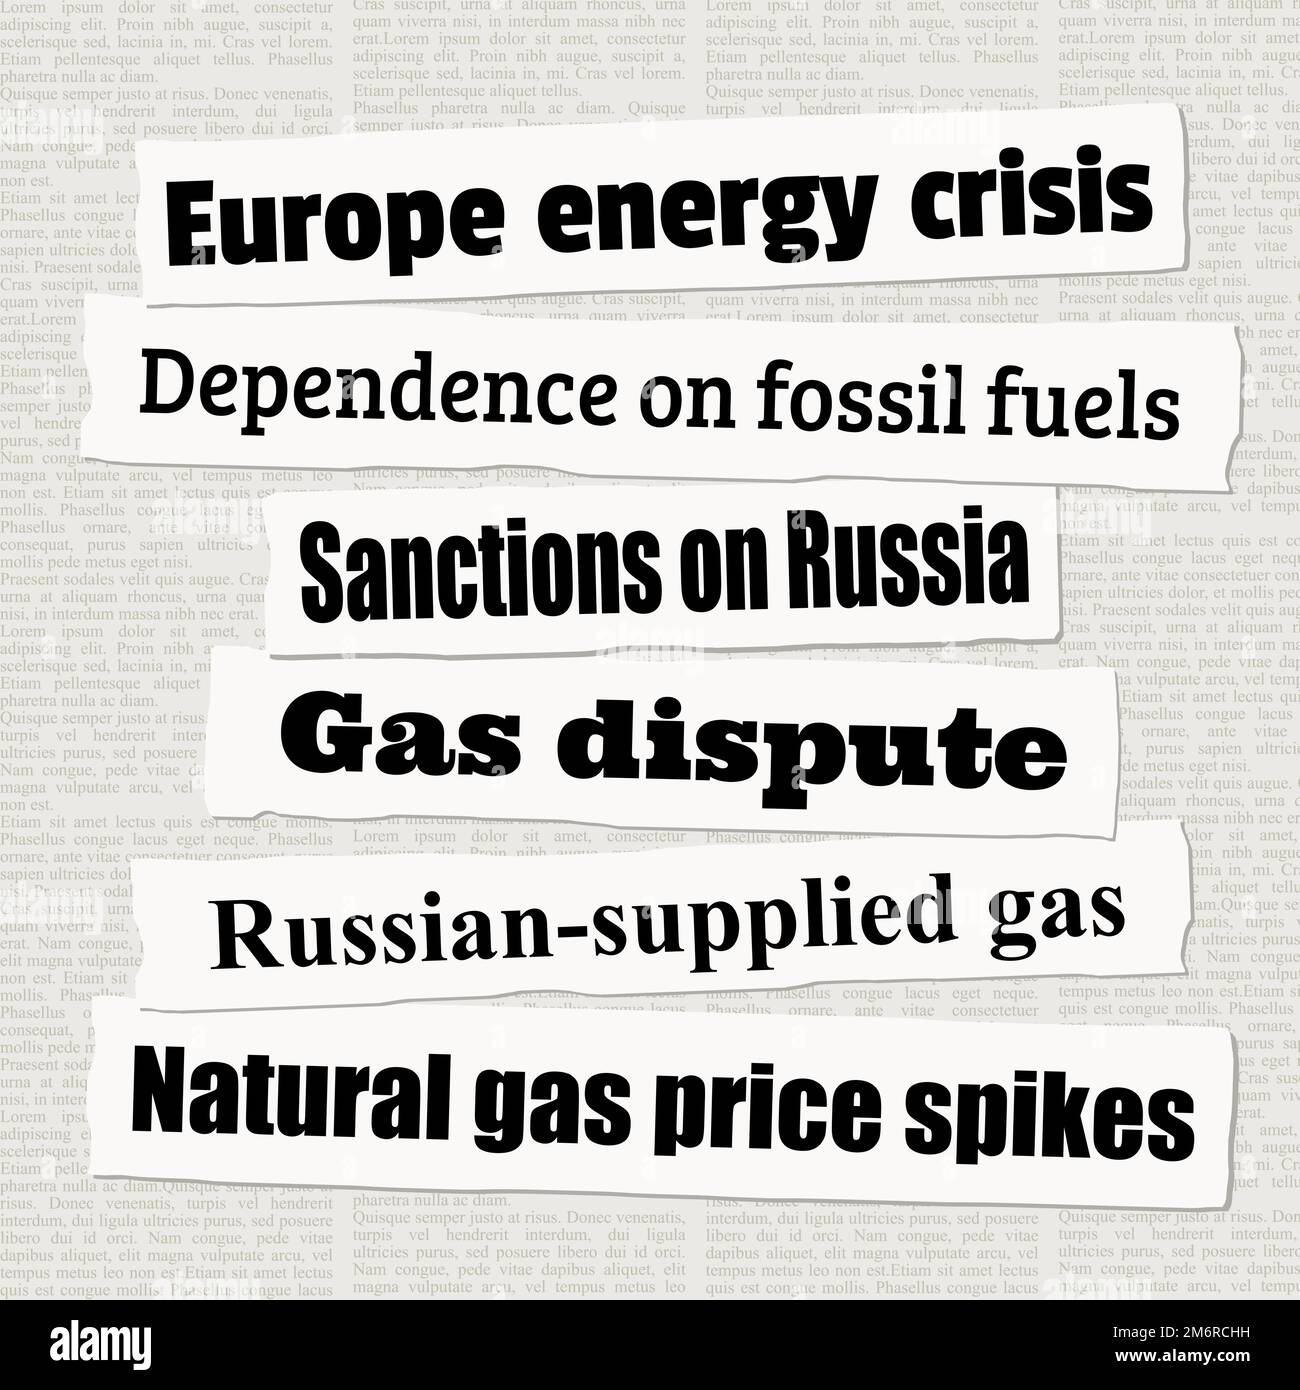 Europe energy crisis news headlines. Newspaper clippings about natural gas crisis and dependency on fossil fuels. Stock Vector